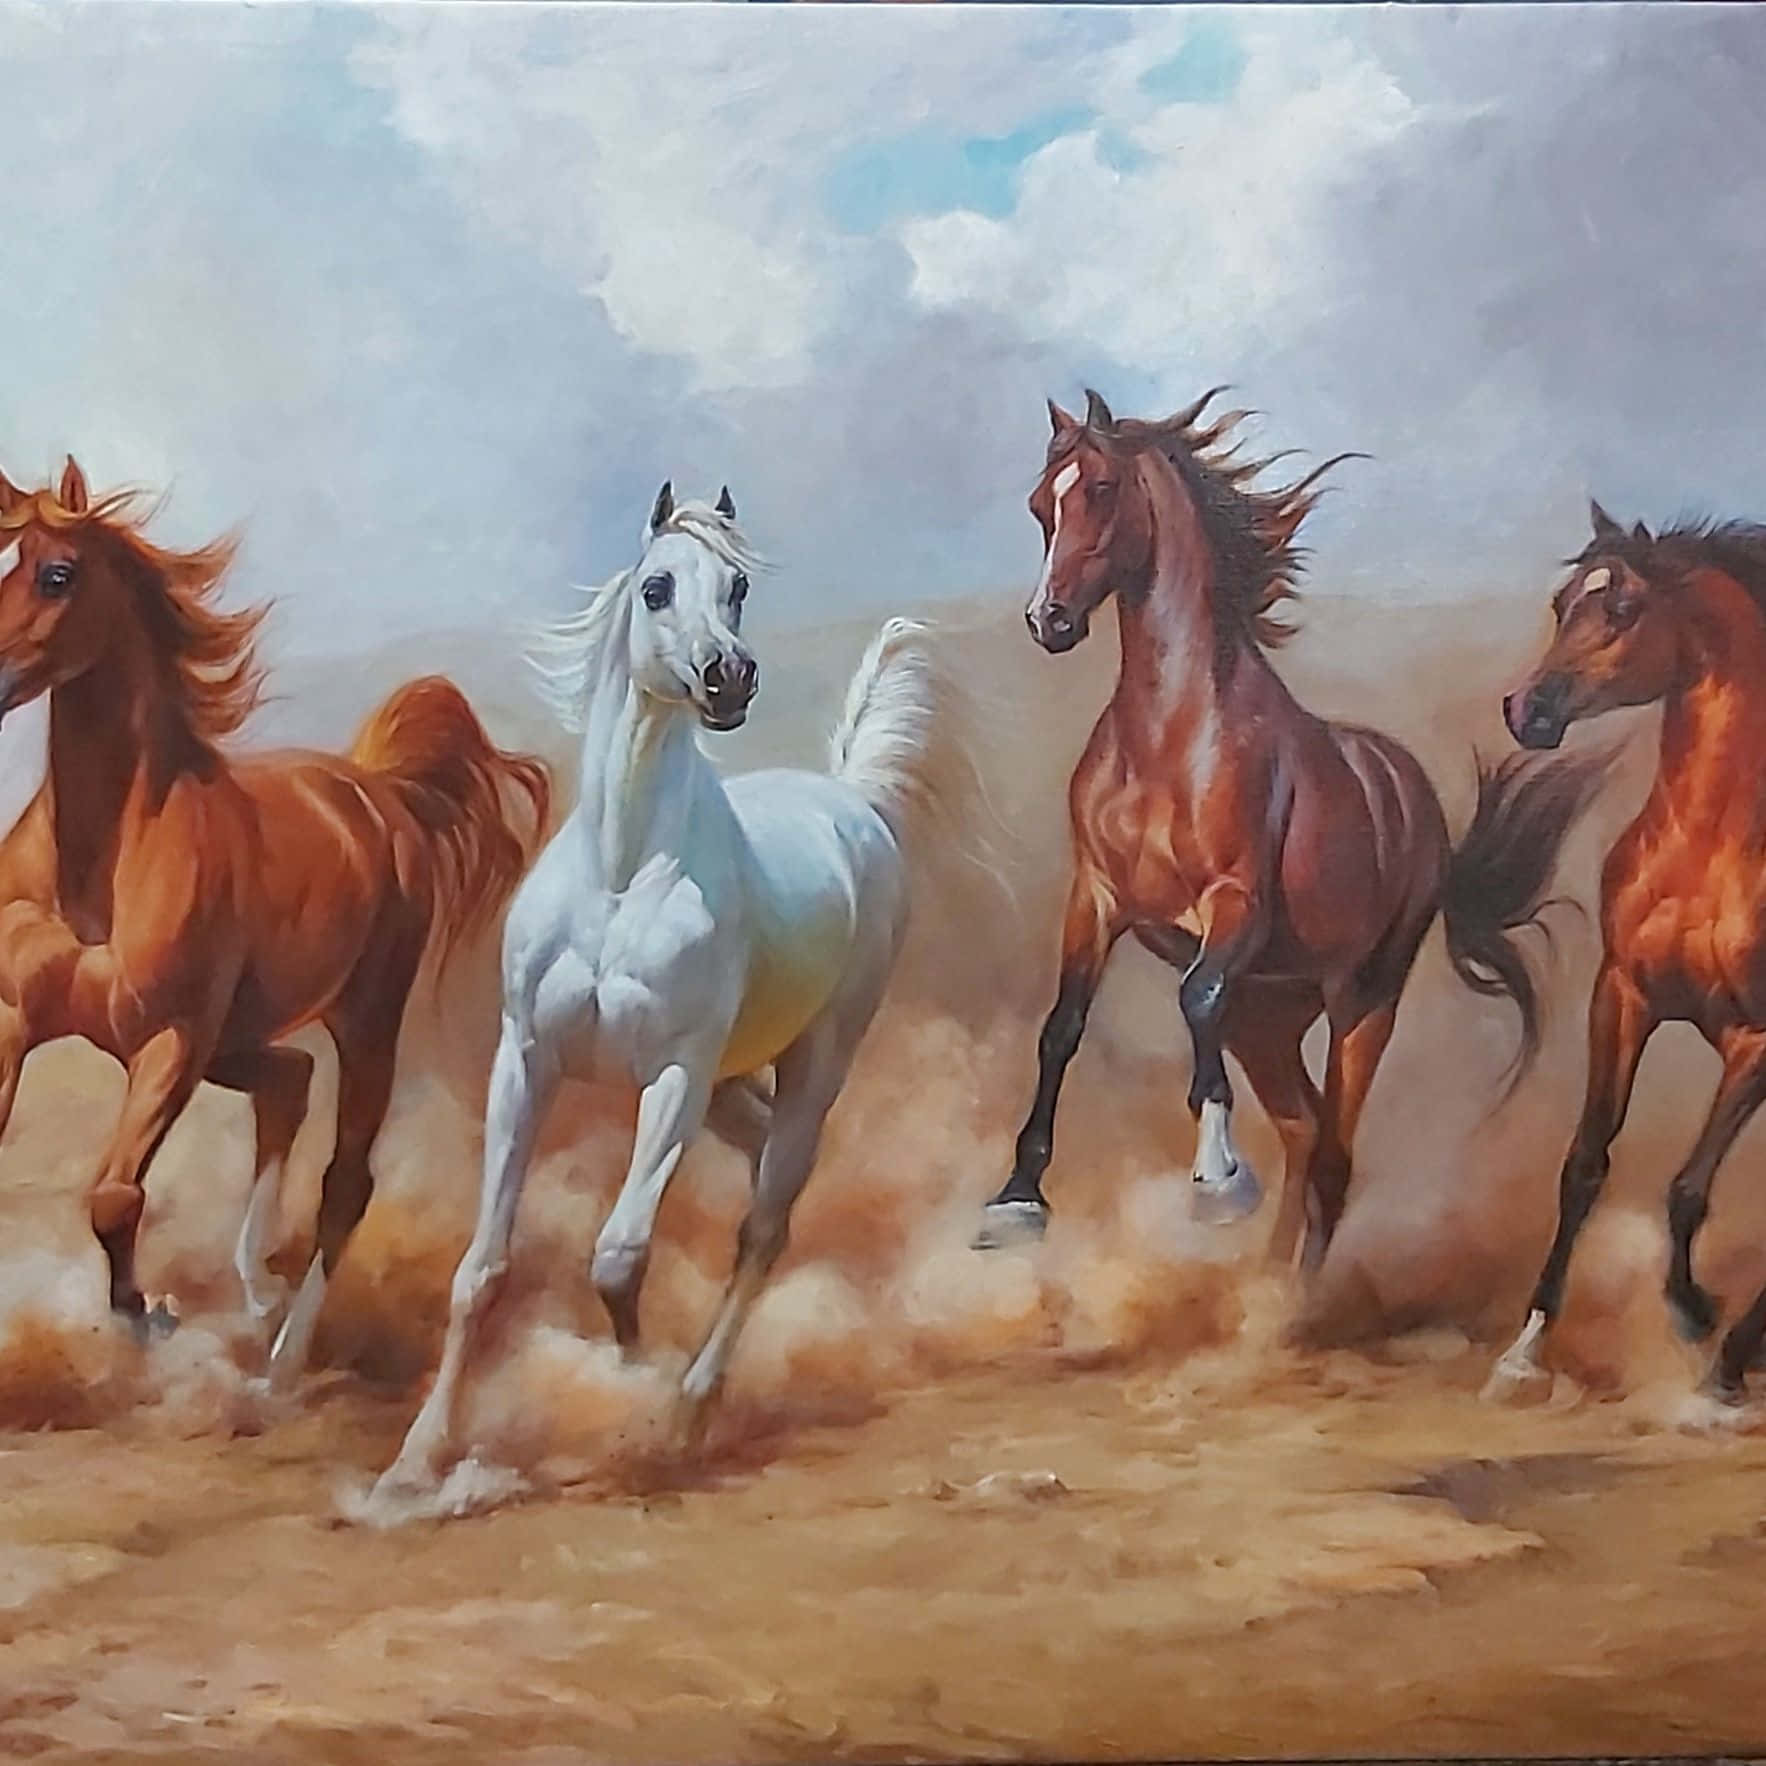 A Painting Of Horses Running In The Desert